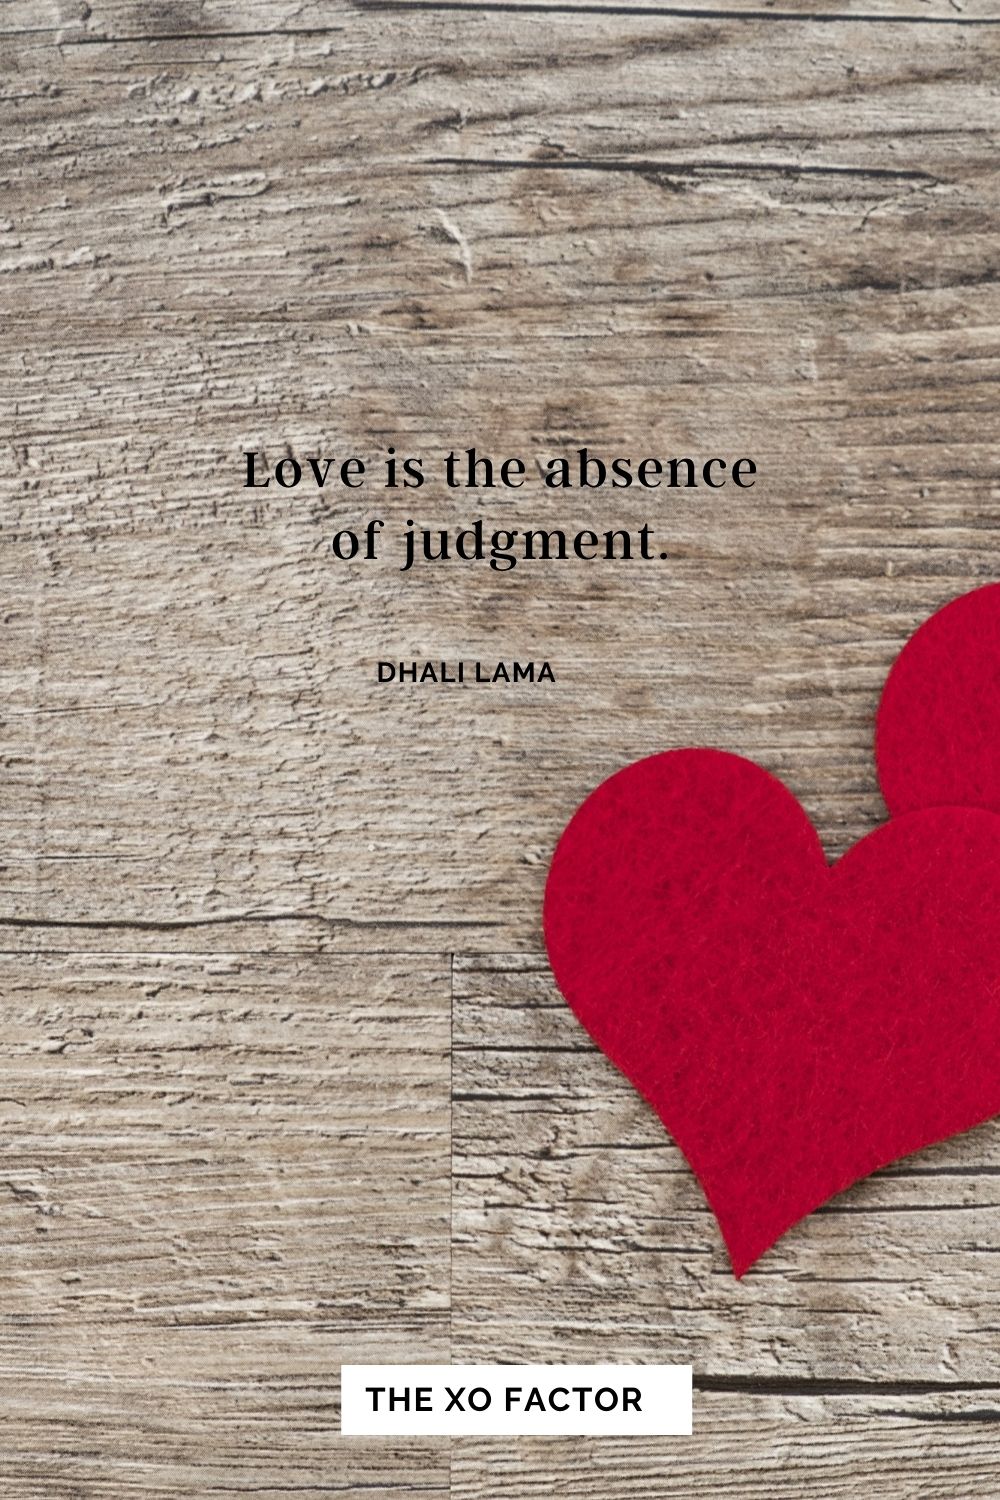 Love is the absence of judgment. Dhali Lama